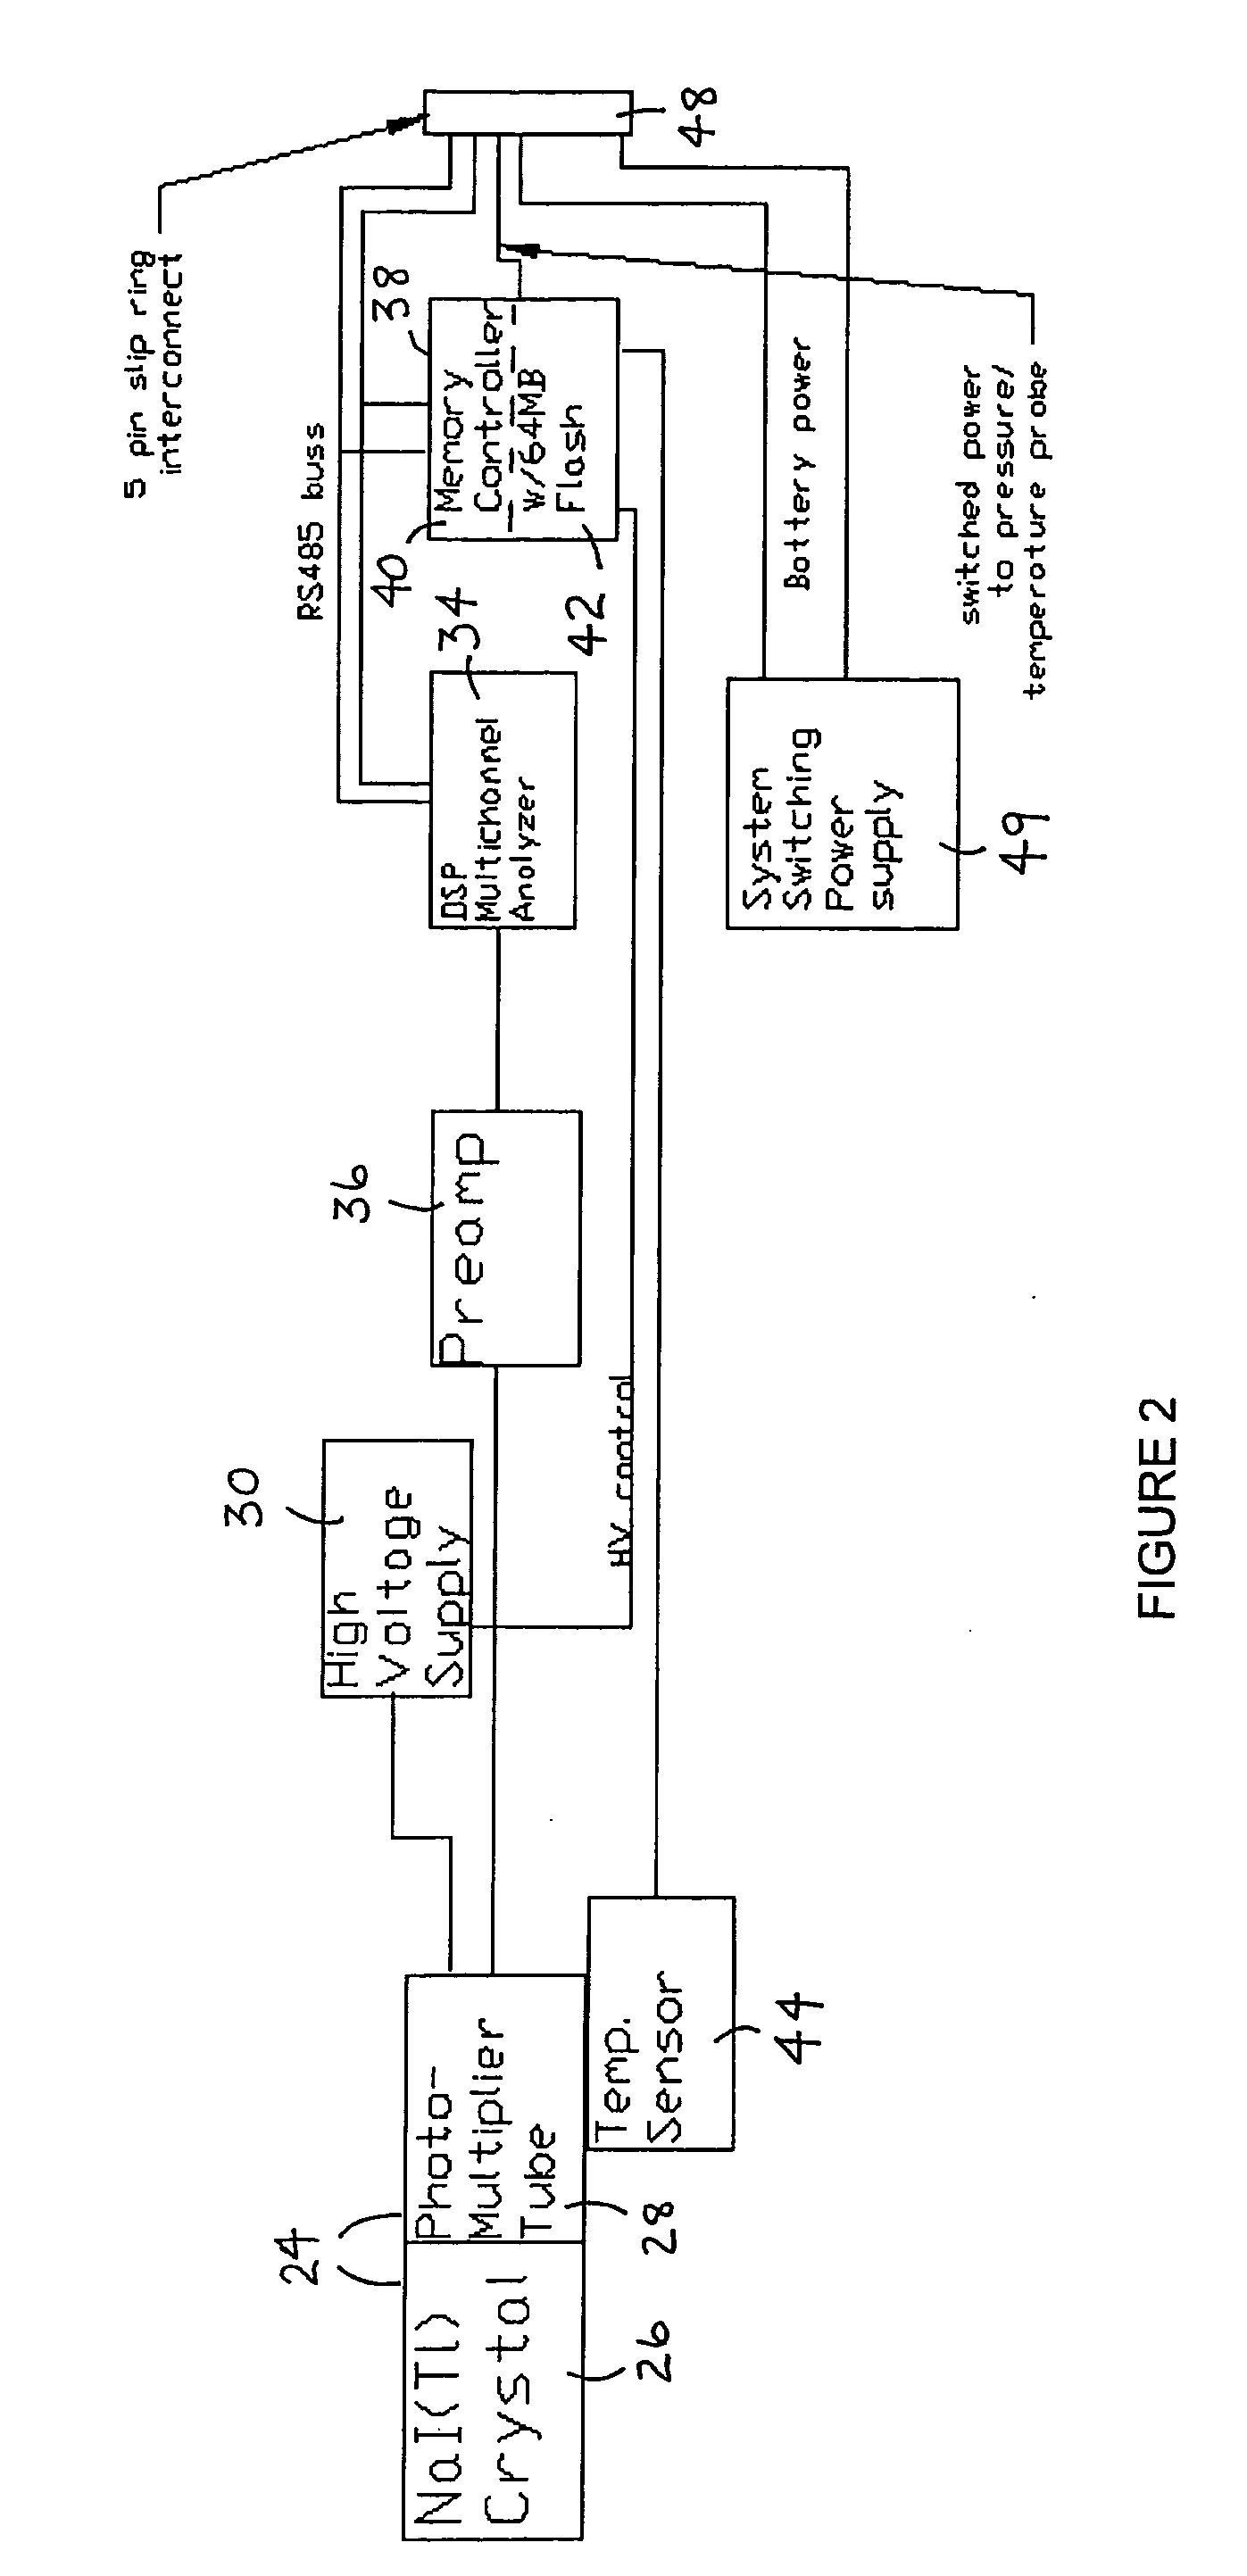 Gamma radiation spectral logging system and method for processing gamma radiation spectra